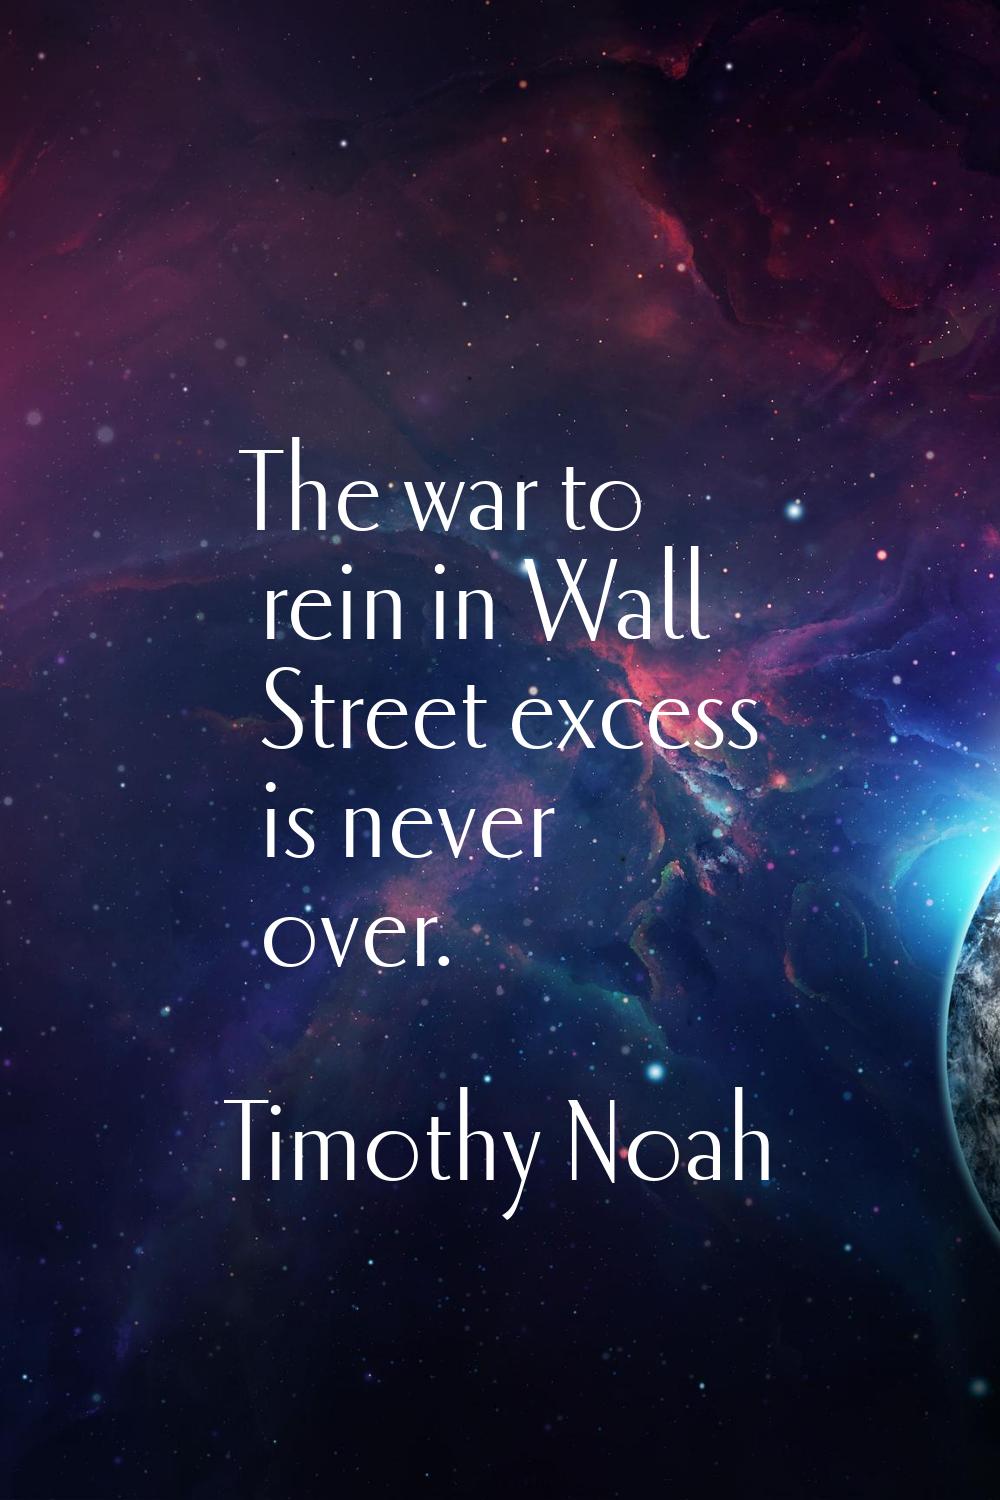 The war to rein in Wall Street excess is never over.